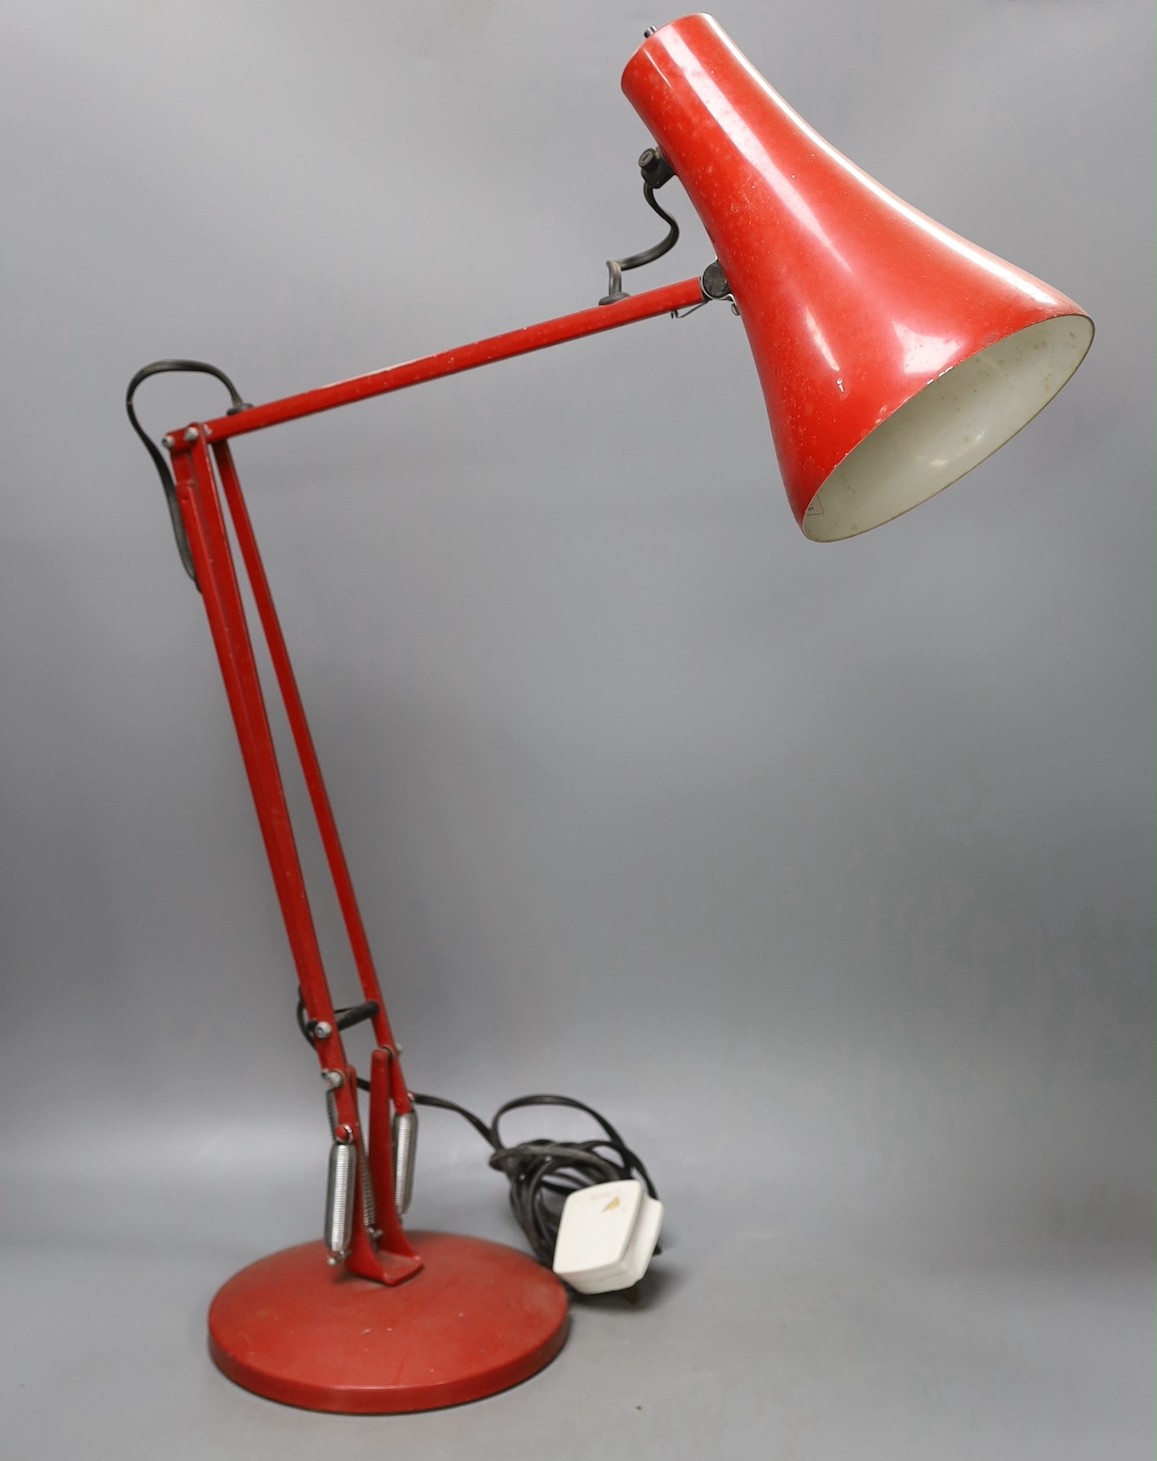 A red anglepoise desk lamp